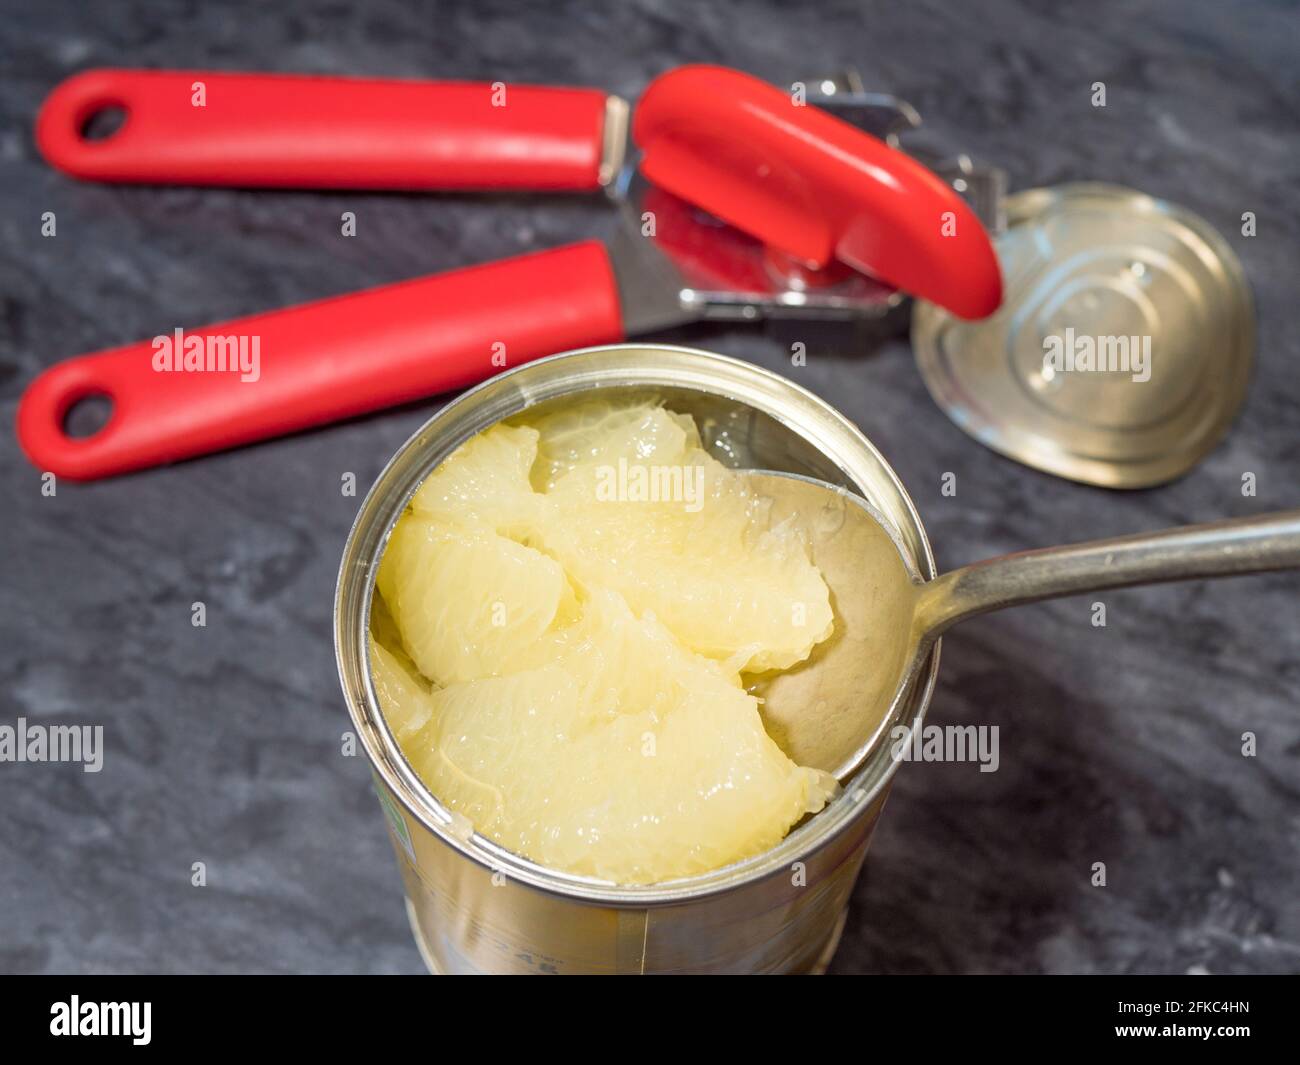 Closeup POV overhead shot of a large spoon lifting some grapefruit slices in juice from a newly opened tin can, with the opener and lid nearby. Stock Photo